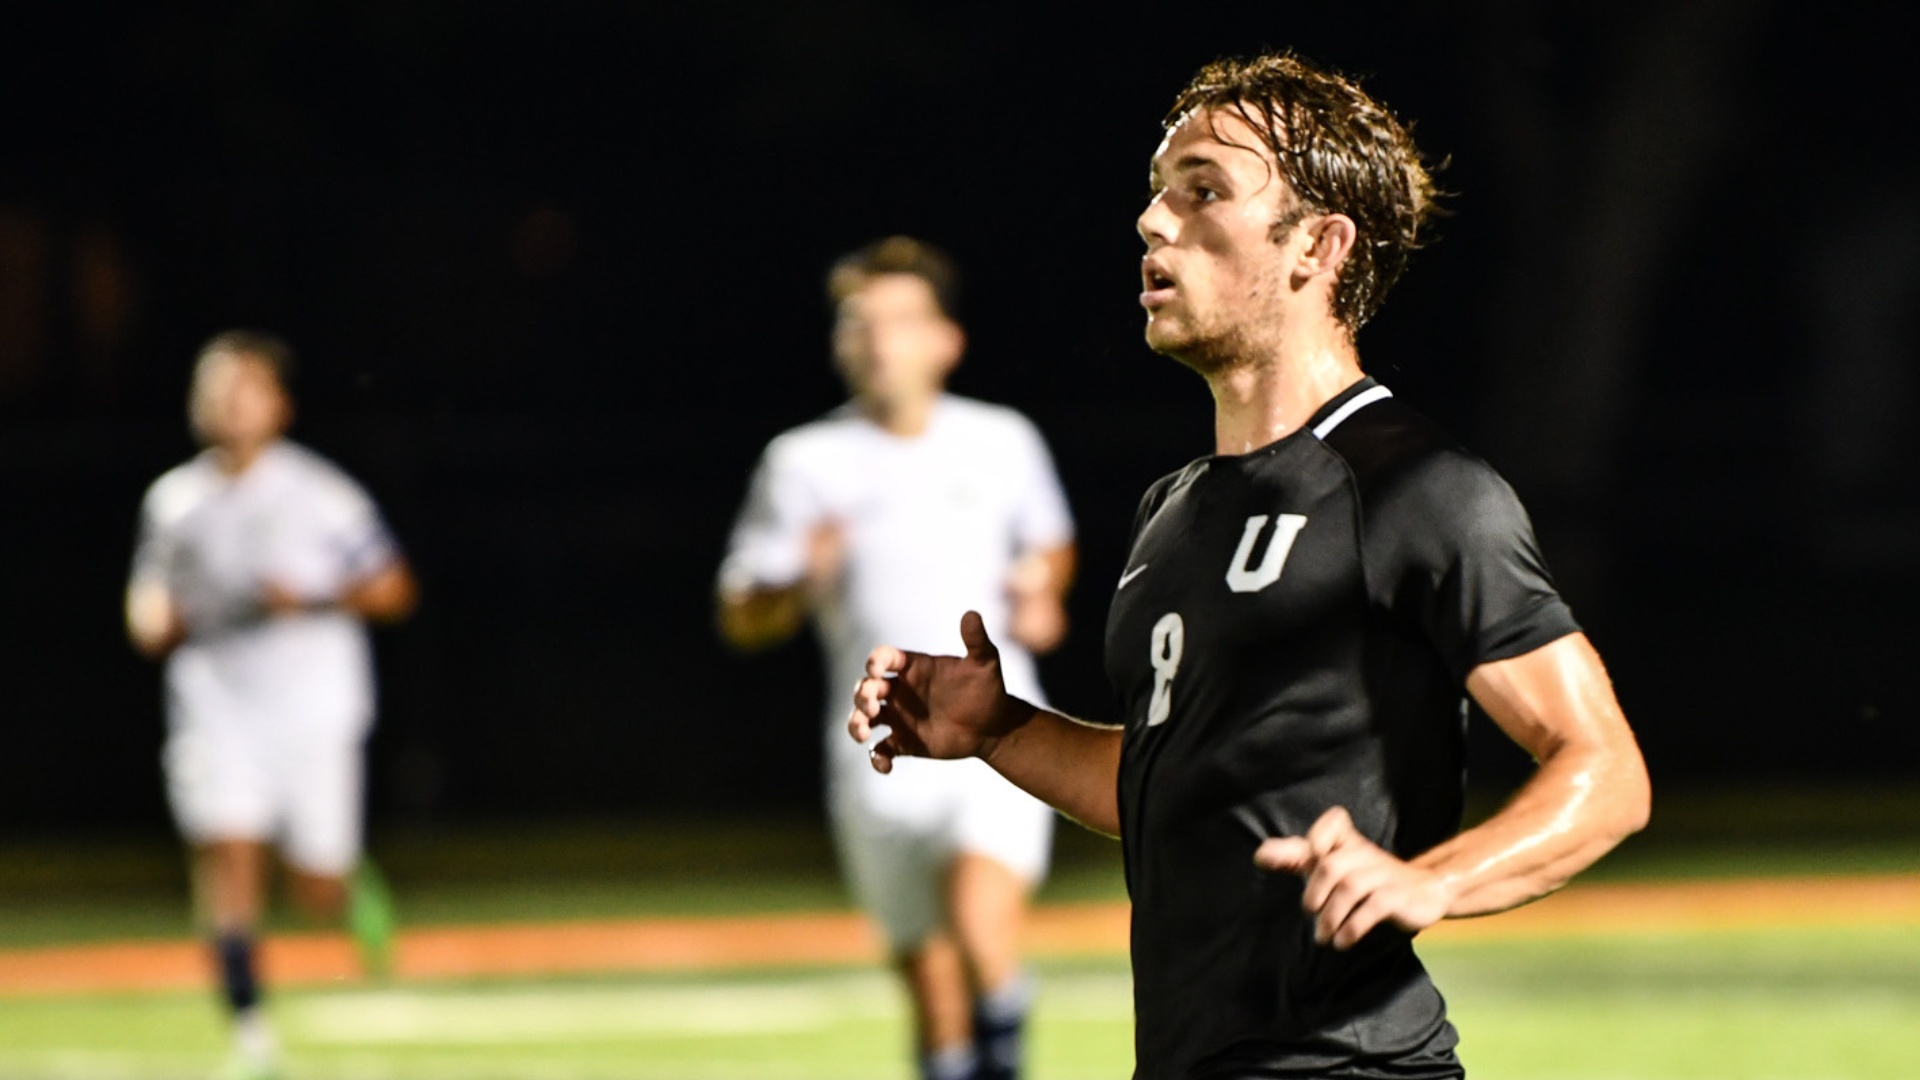 Union men’s soccer ranked No. 14 in latest NAIA Coaches’ Poll